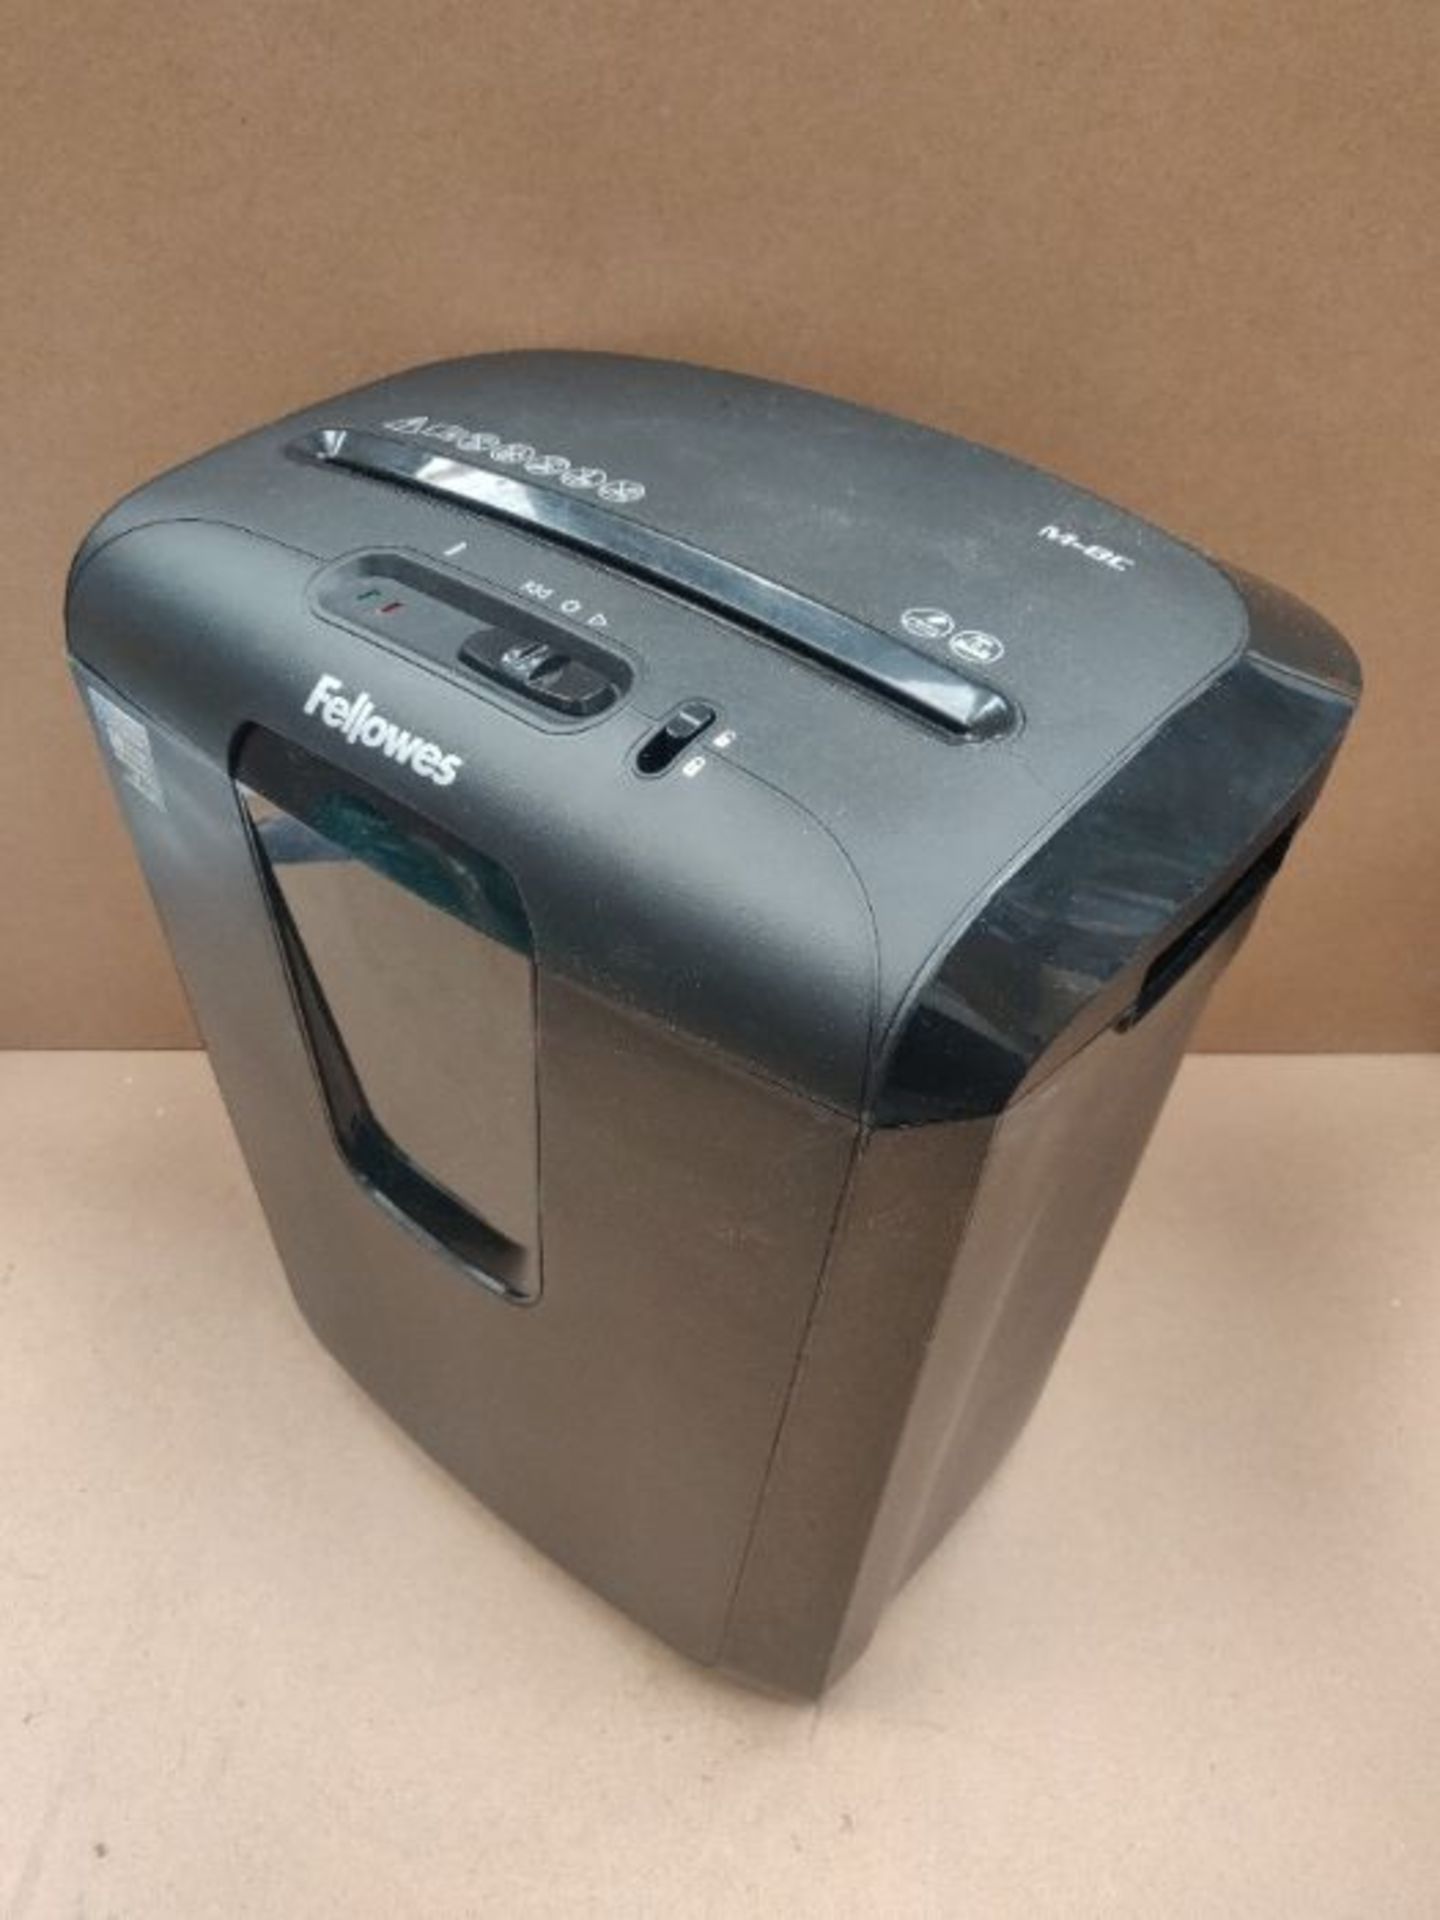 Fellowes Powershred M-8C 8 Sheet Cross Cut Personal Shredder with Safety Lock - Image 3 of 3